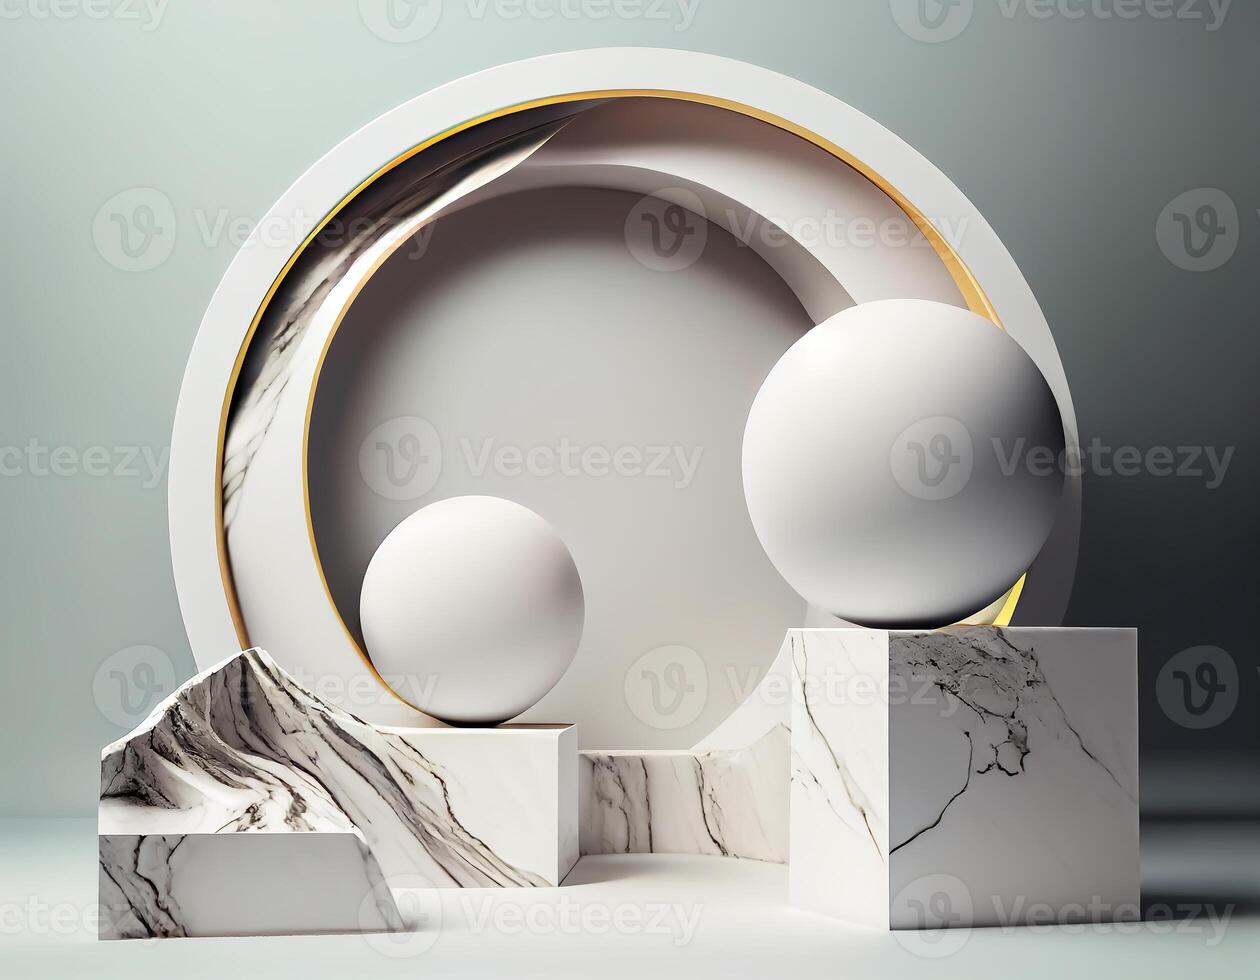 Abstract 3d podium for product presentation with geometric shapes, Empty round podium,Platforms for product presentation show new product background. photo